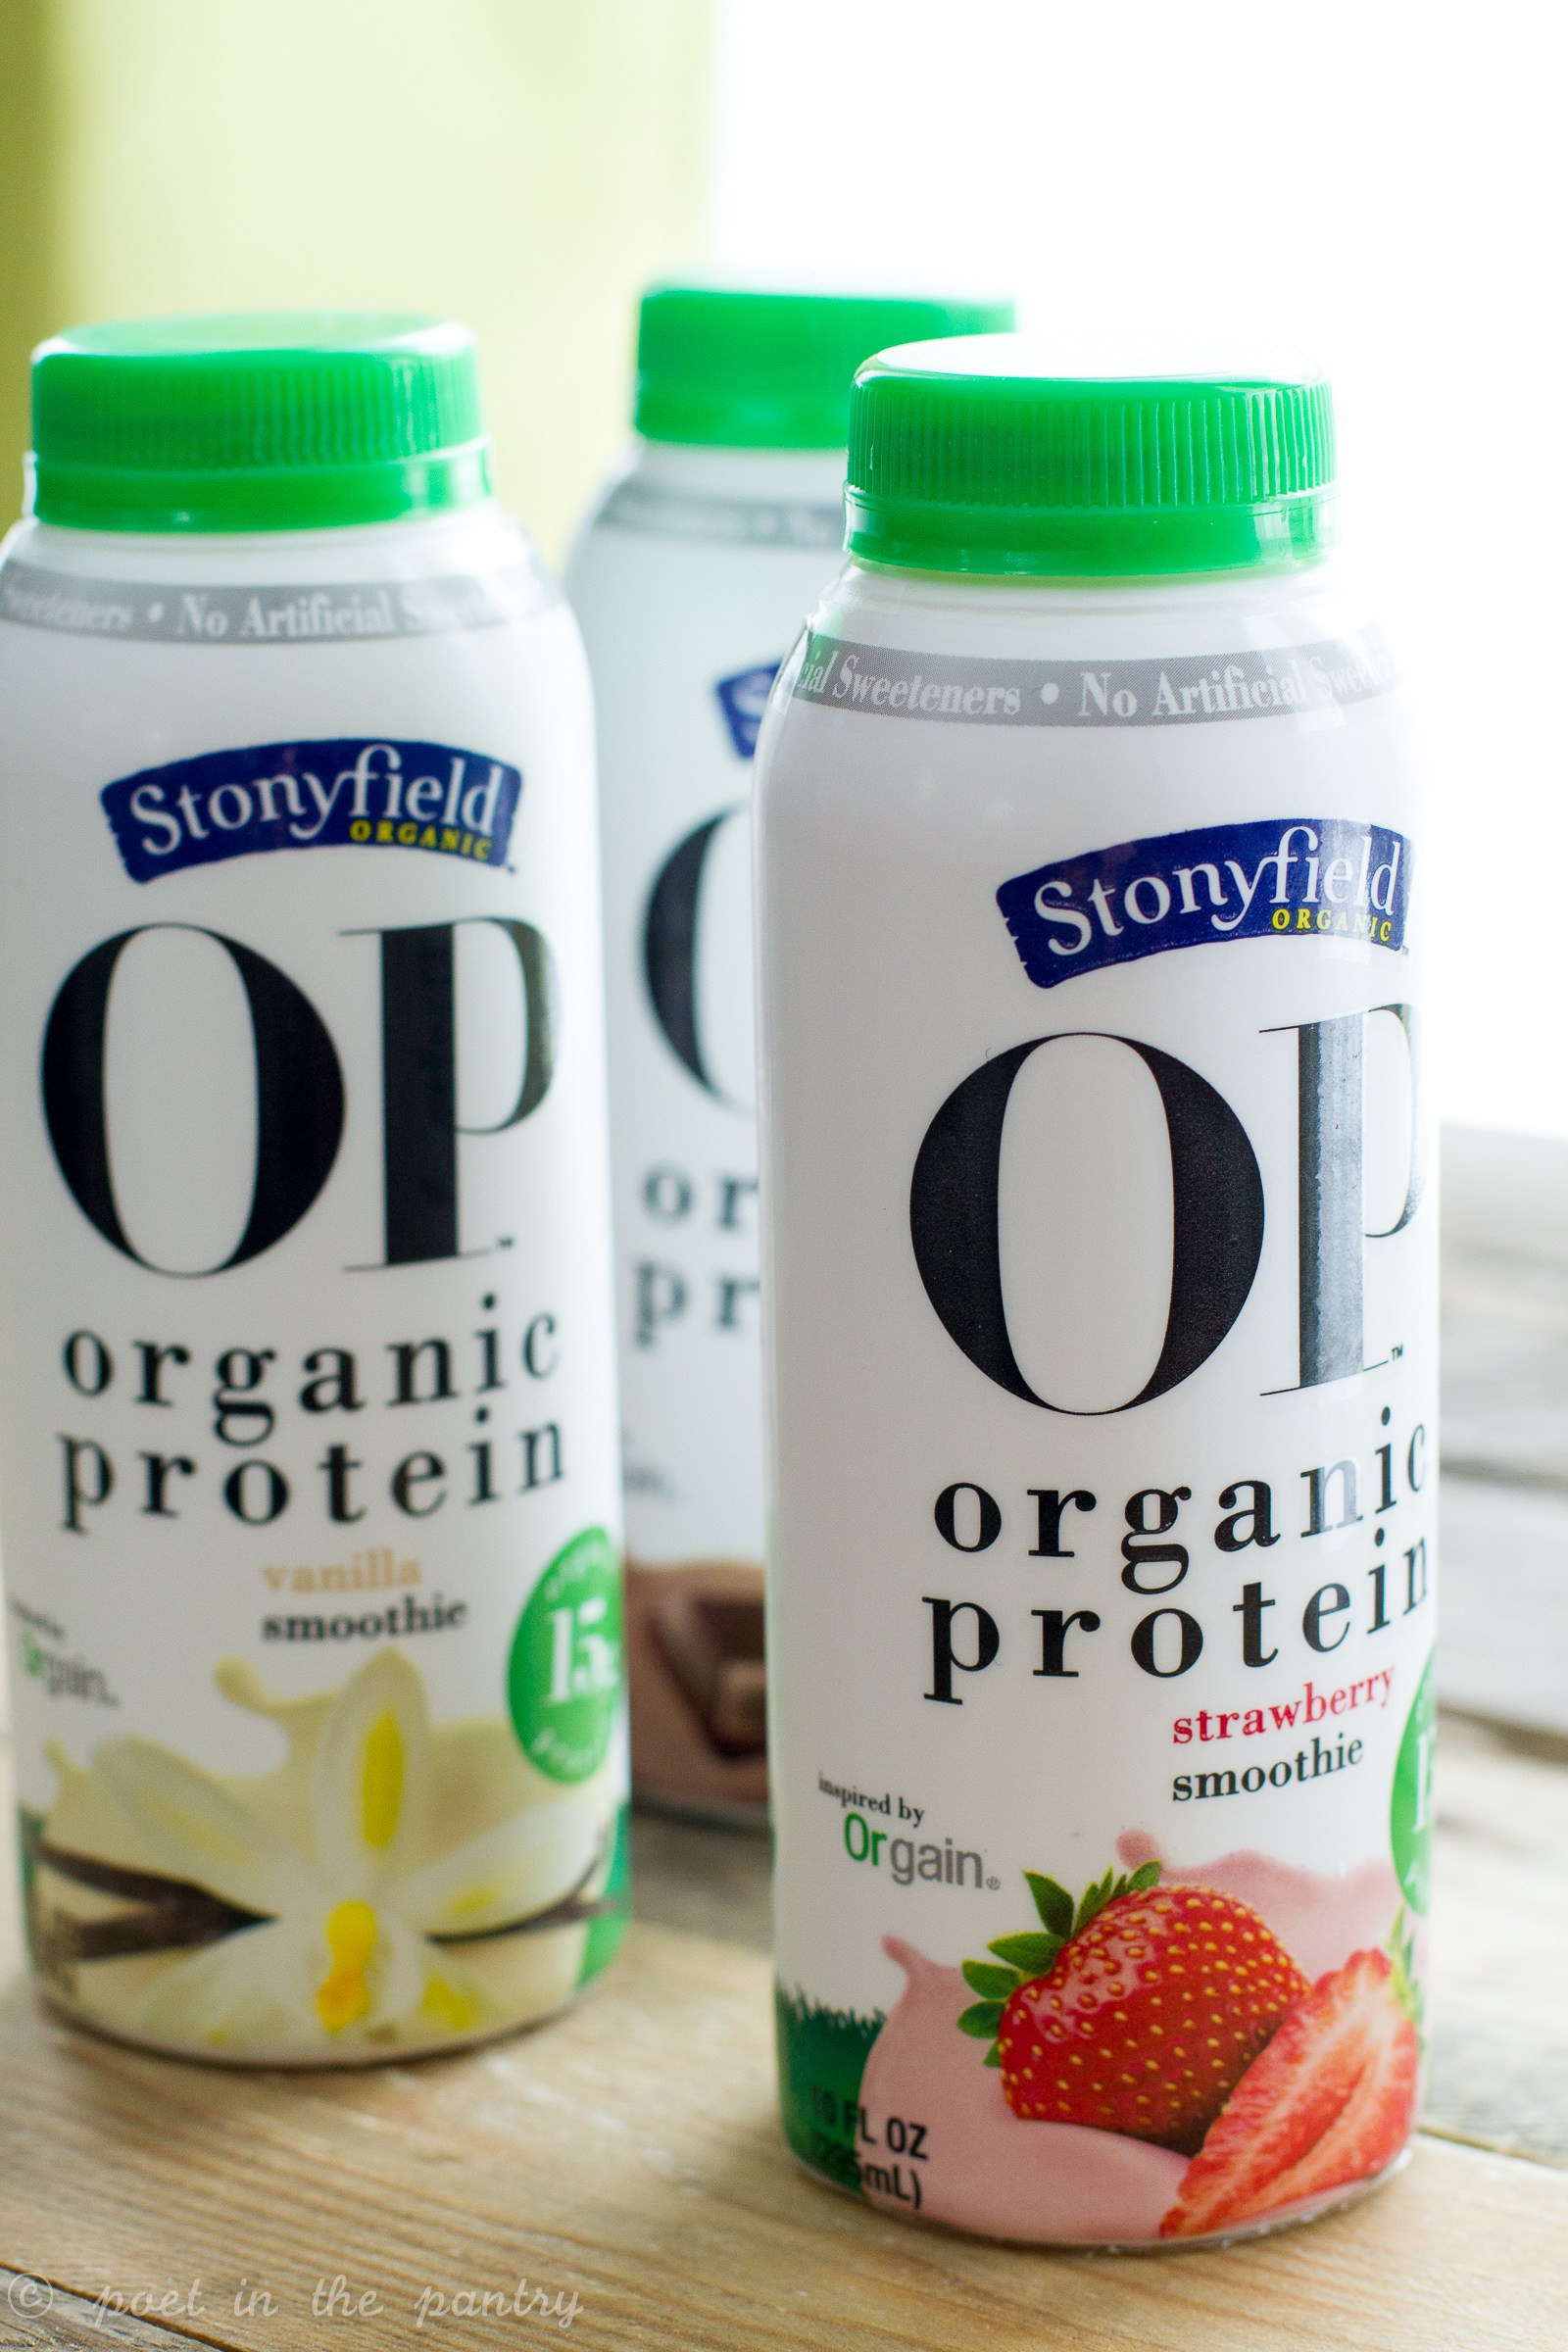 Stonyfield Organic Smoothies
 Review Stonyfield OP Organic Protein Smoothies